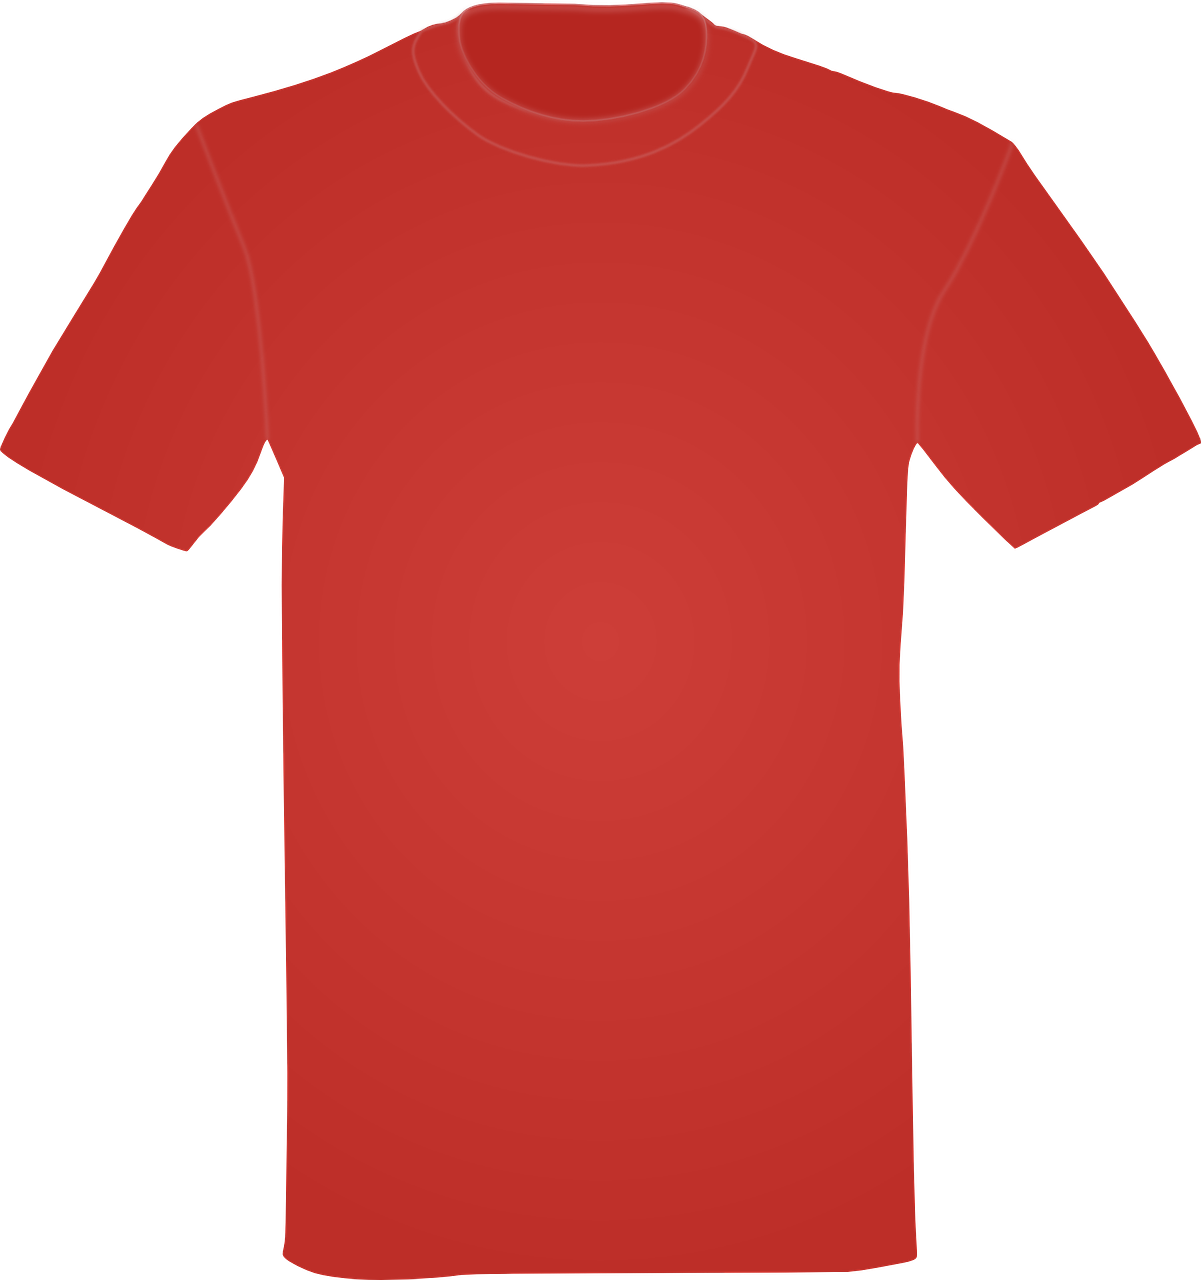 Plain Red T Shirt Graphic PNG